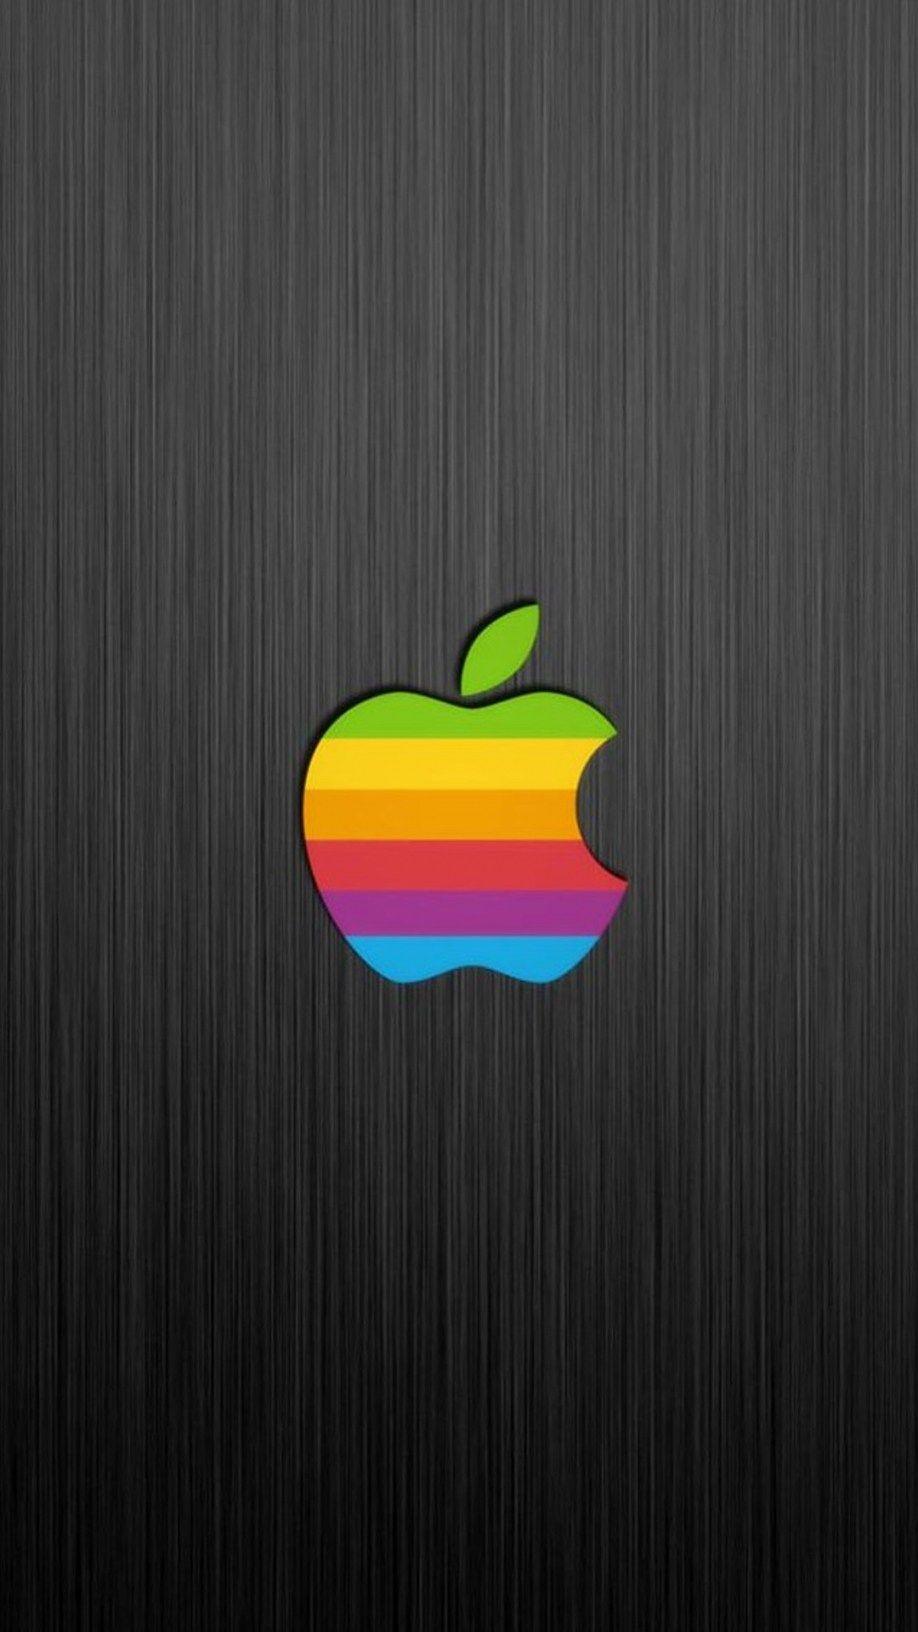 Apple Iphone 6 Plus Wallpapers Top Free Apple Iphone 6 Plus Backgrounds Wallpaperaccess